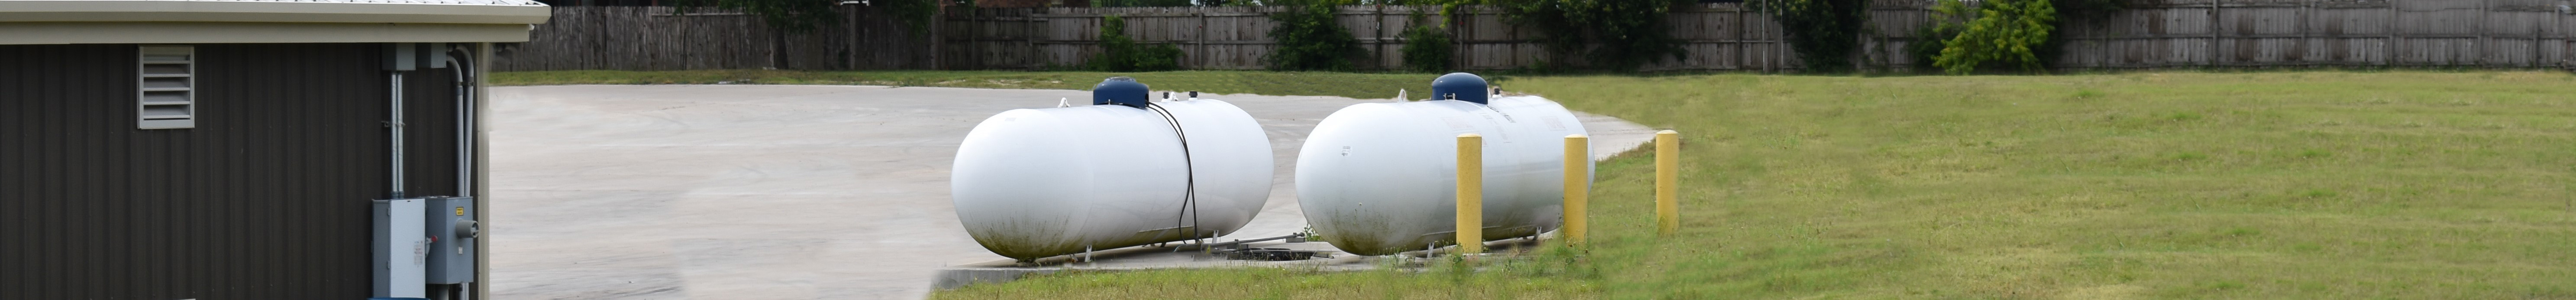 Two 1000 gallon propane tanks installed side by side